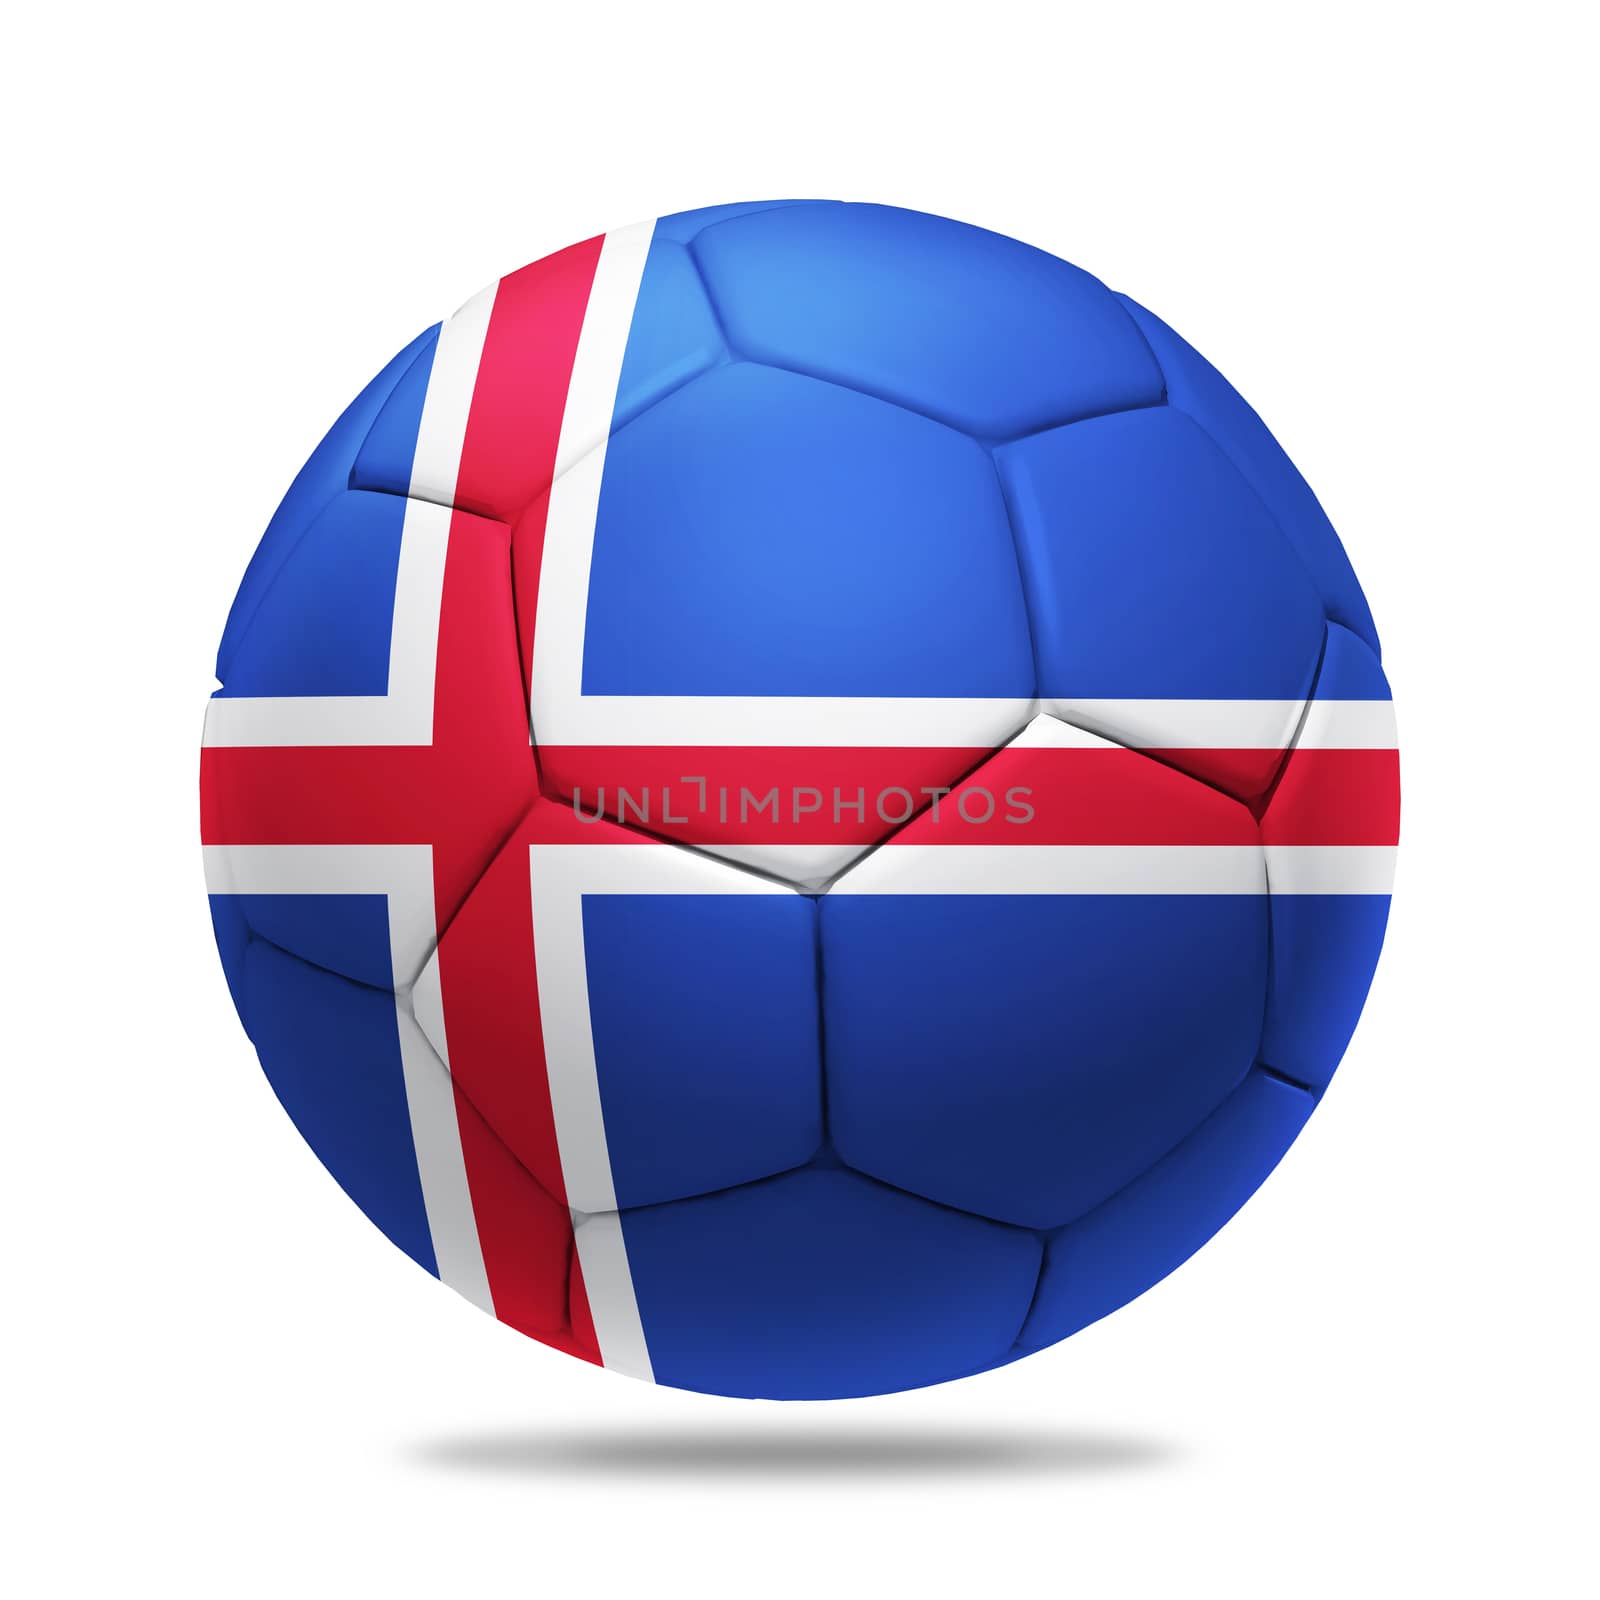 3D soccer ball with Iceland team flag, isolated on white